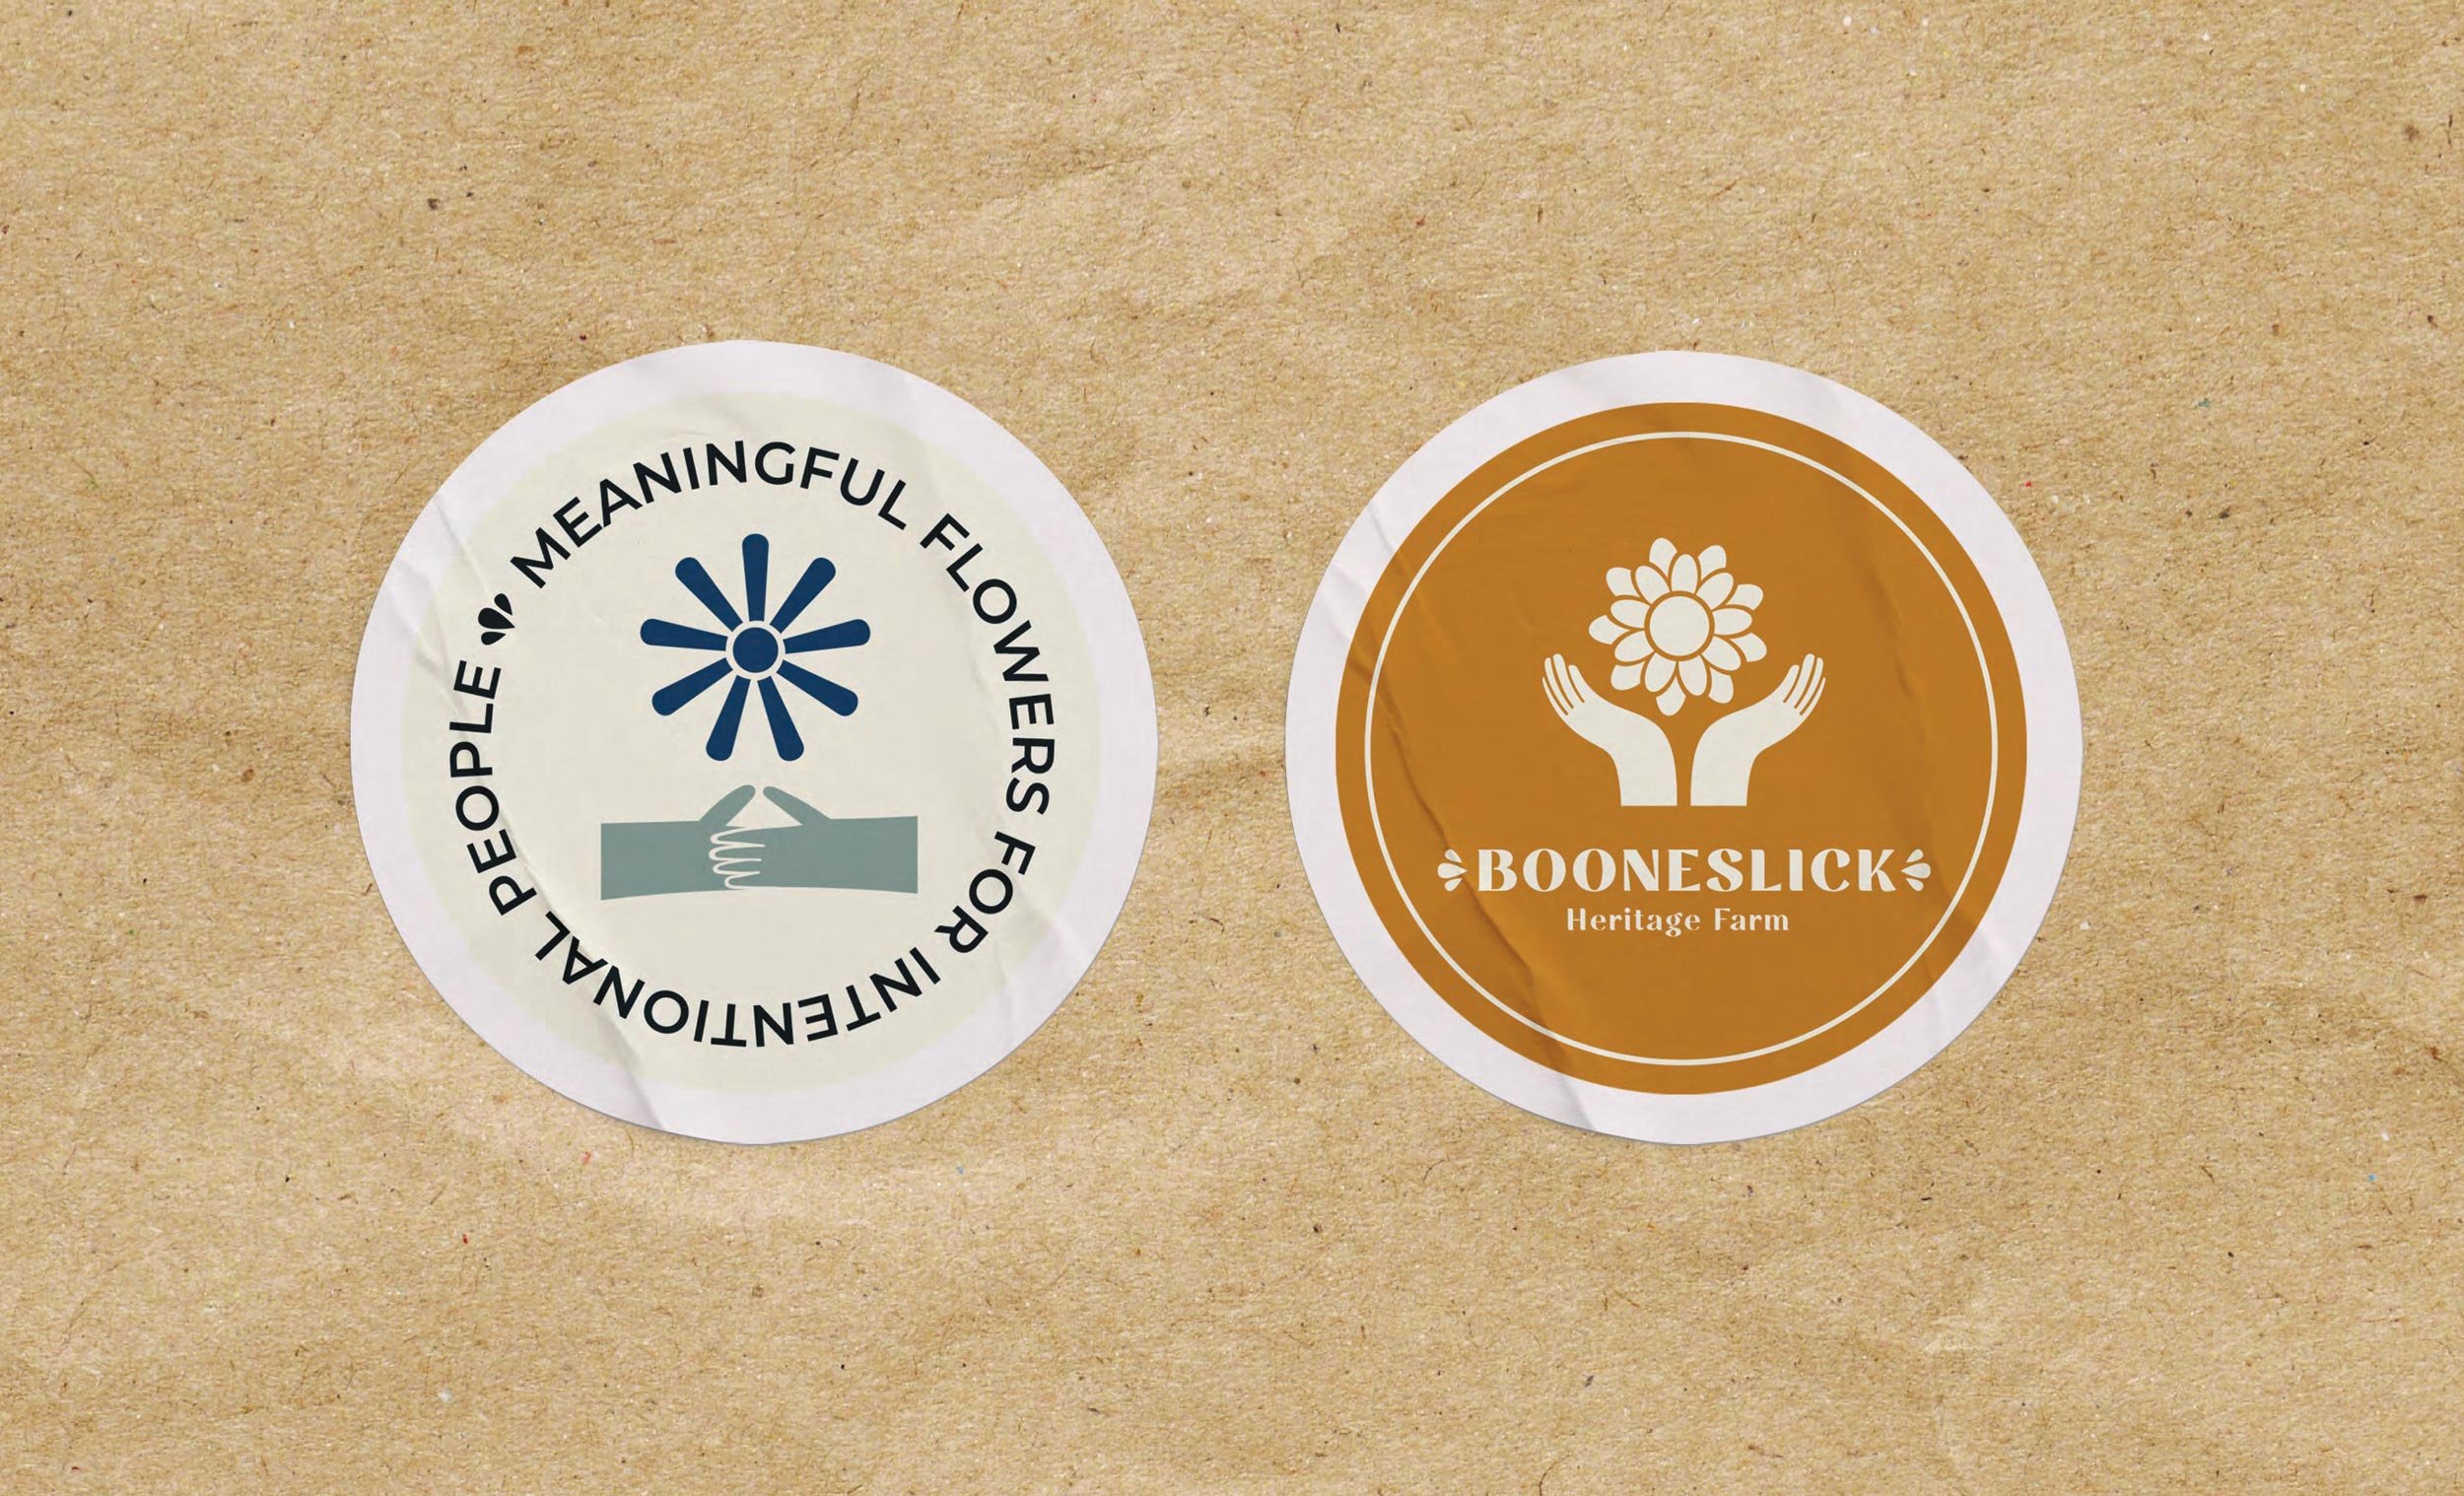  Branded materials for BLH Farms with logos and icons. 